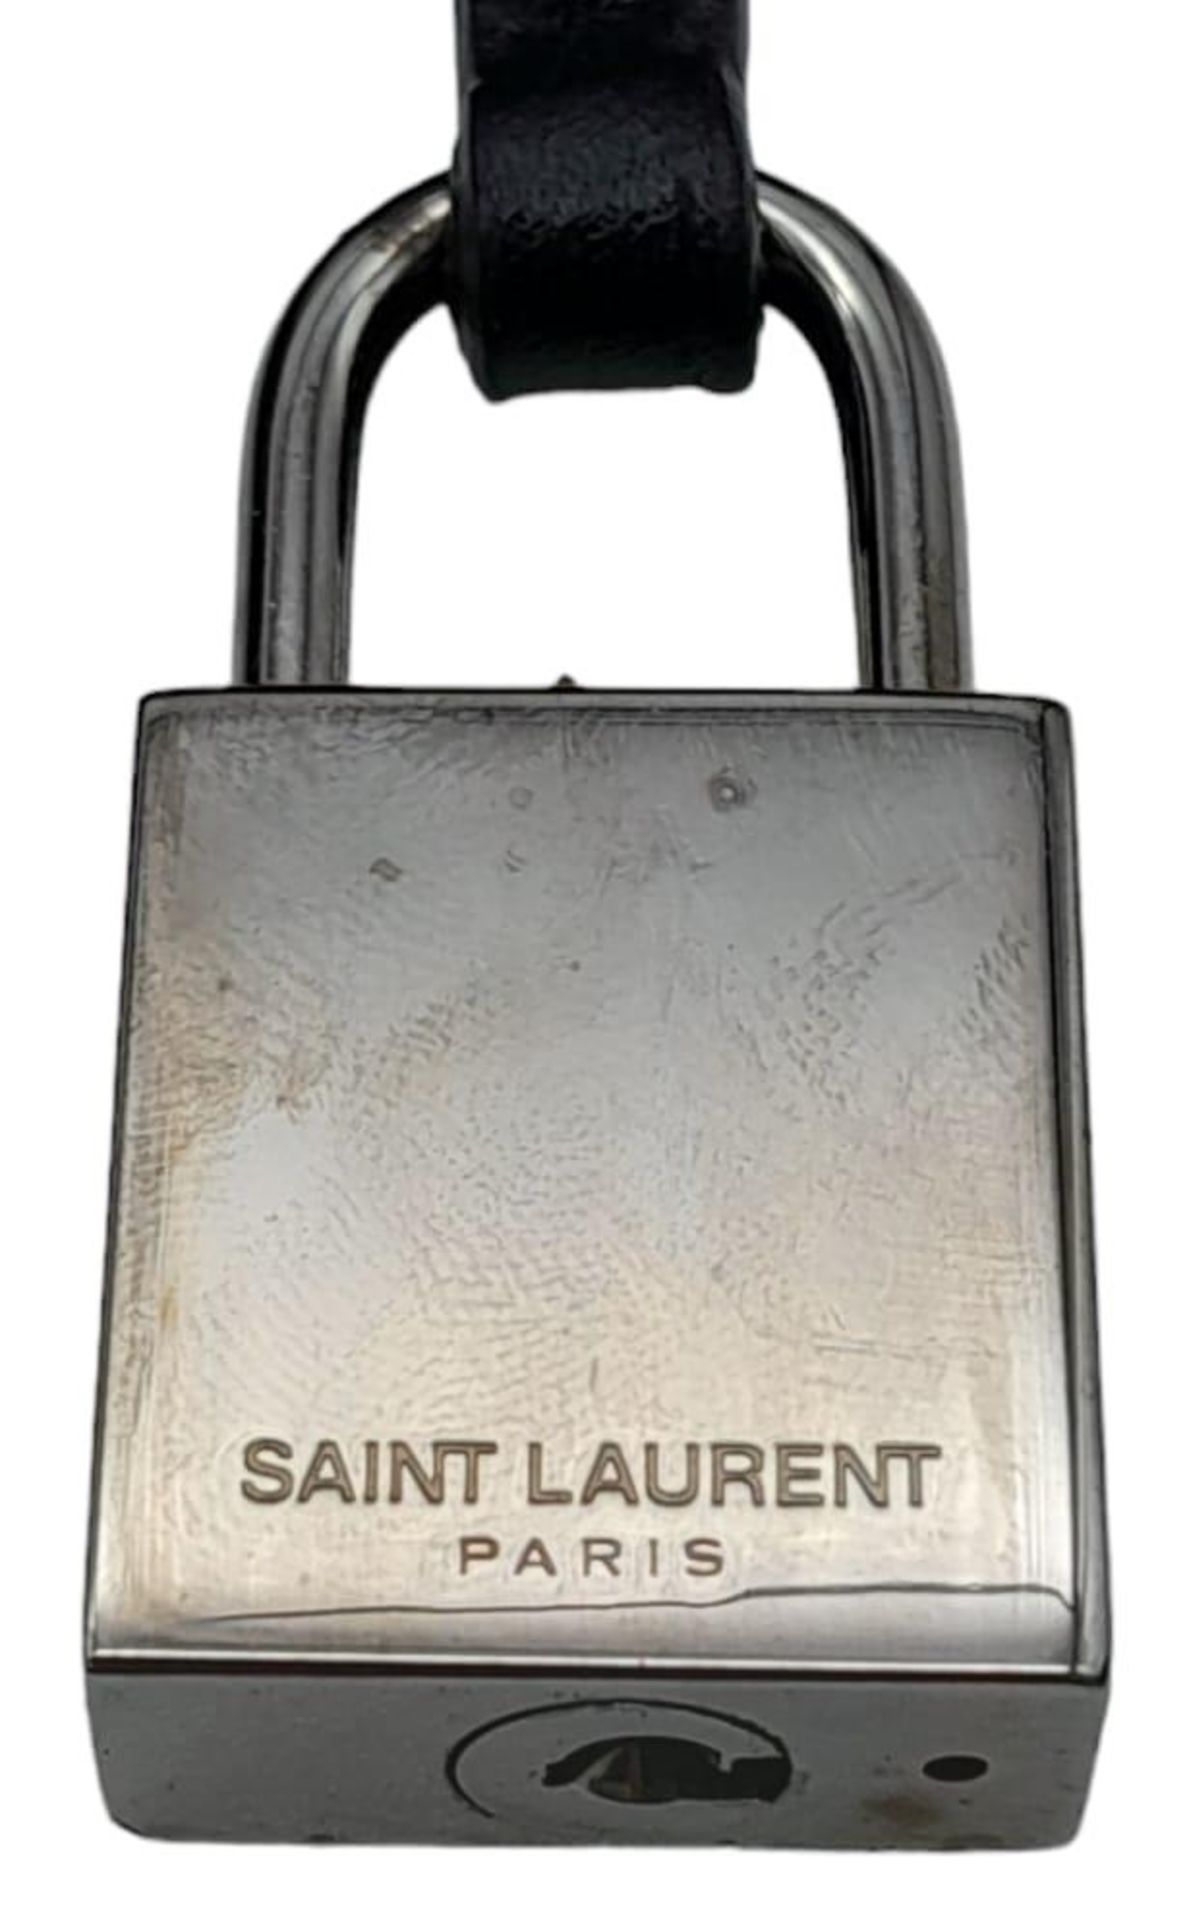 A Saint Laurent Sac de Jour Handbag. Crocodile embossed leather exterior with silver hardware and - Image 14 of 21